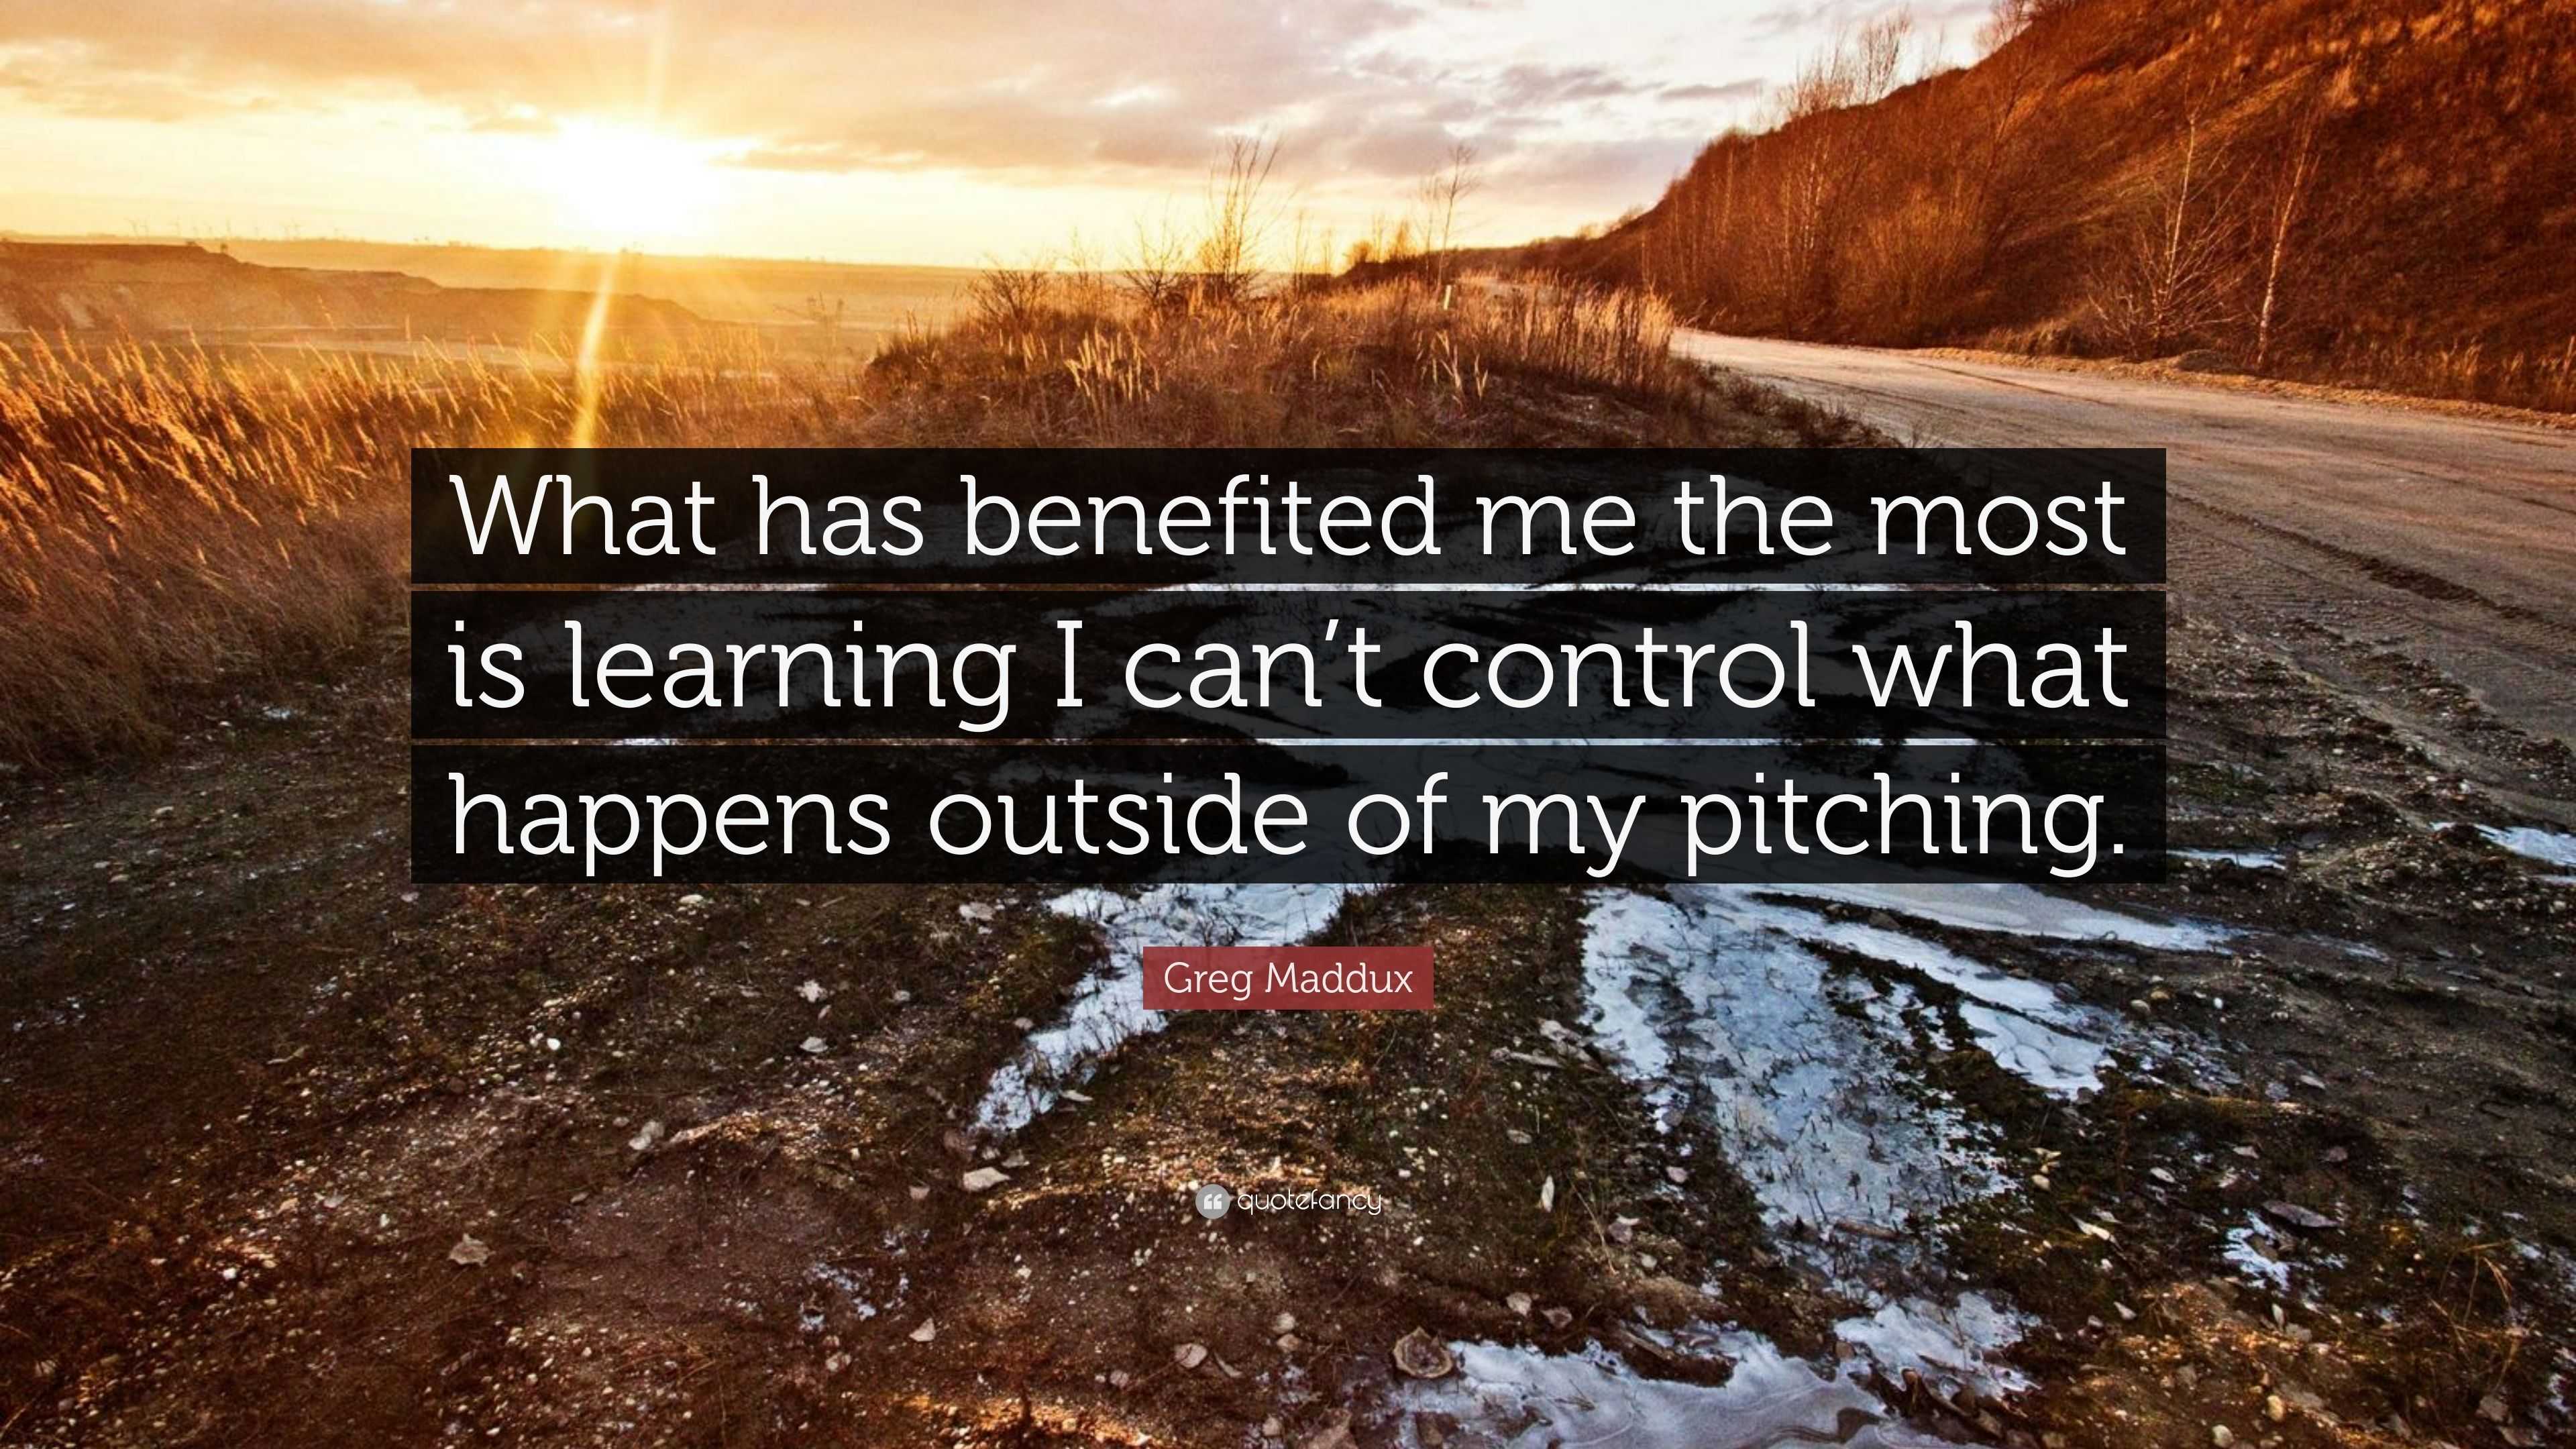 Greg Maddux Quote: “What has benefited me the most is learning I can't  control what